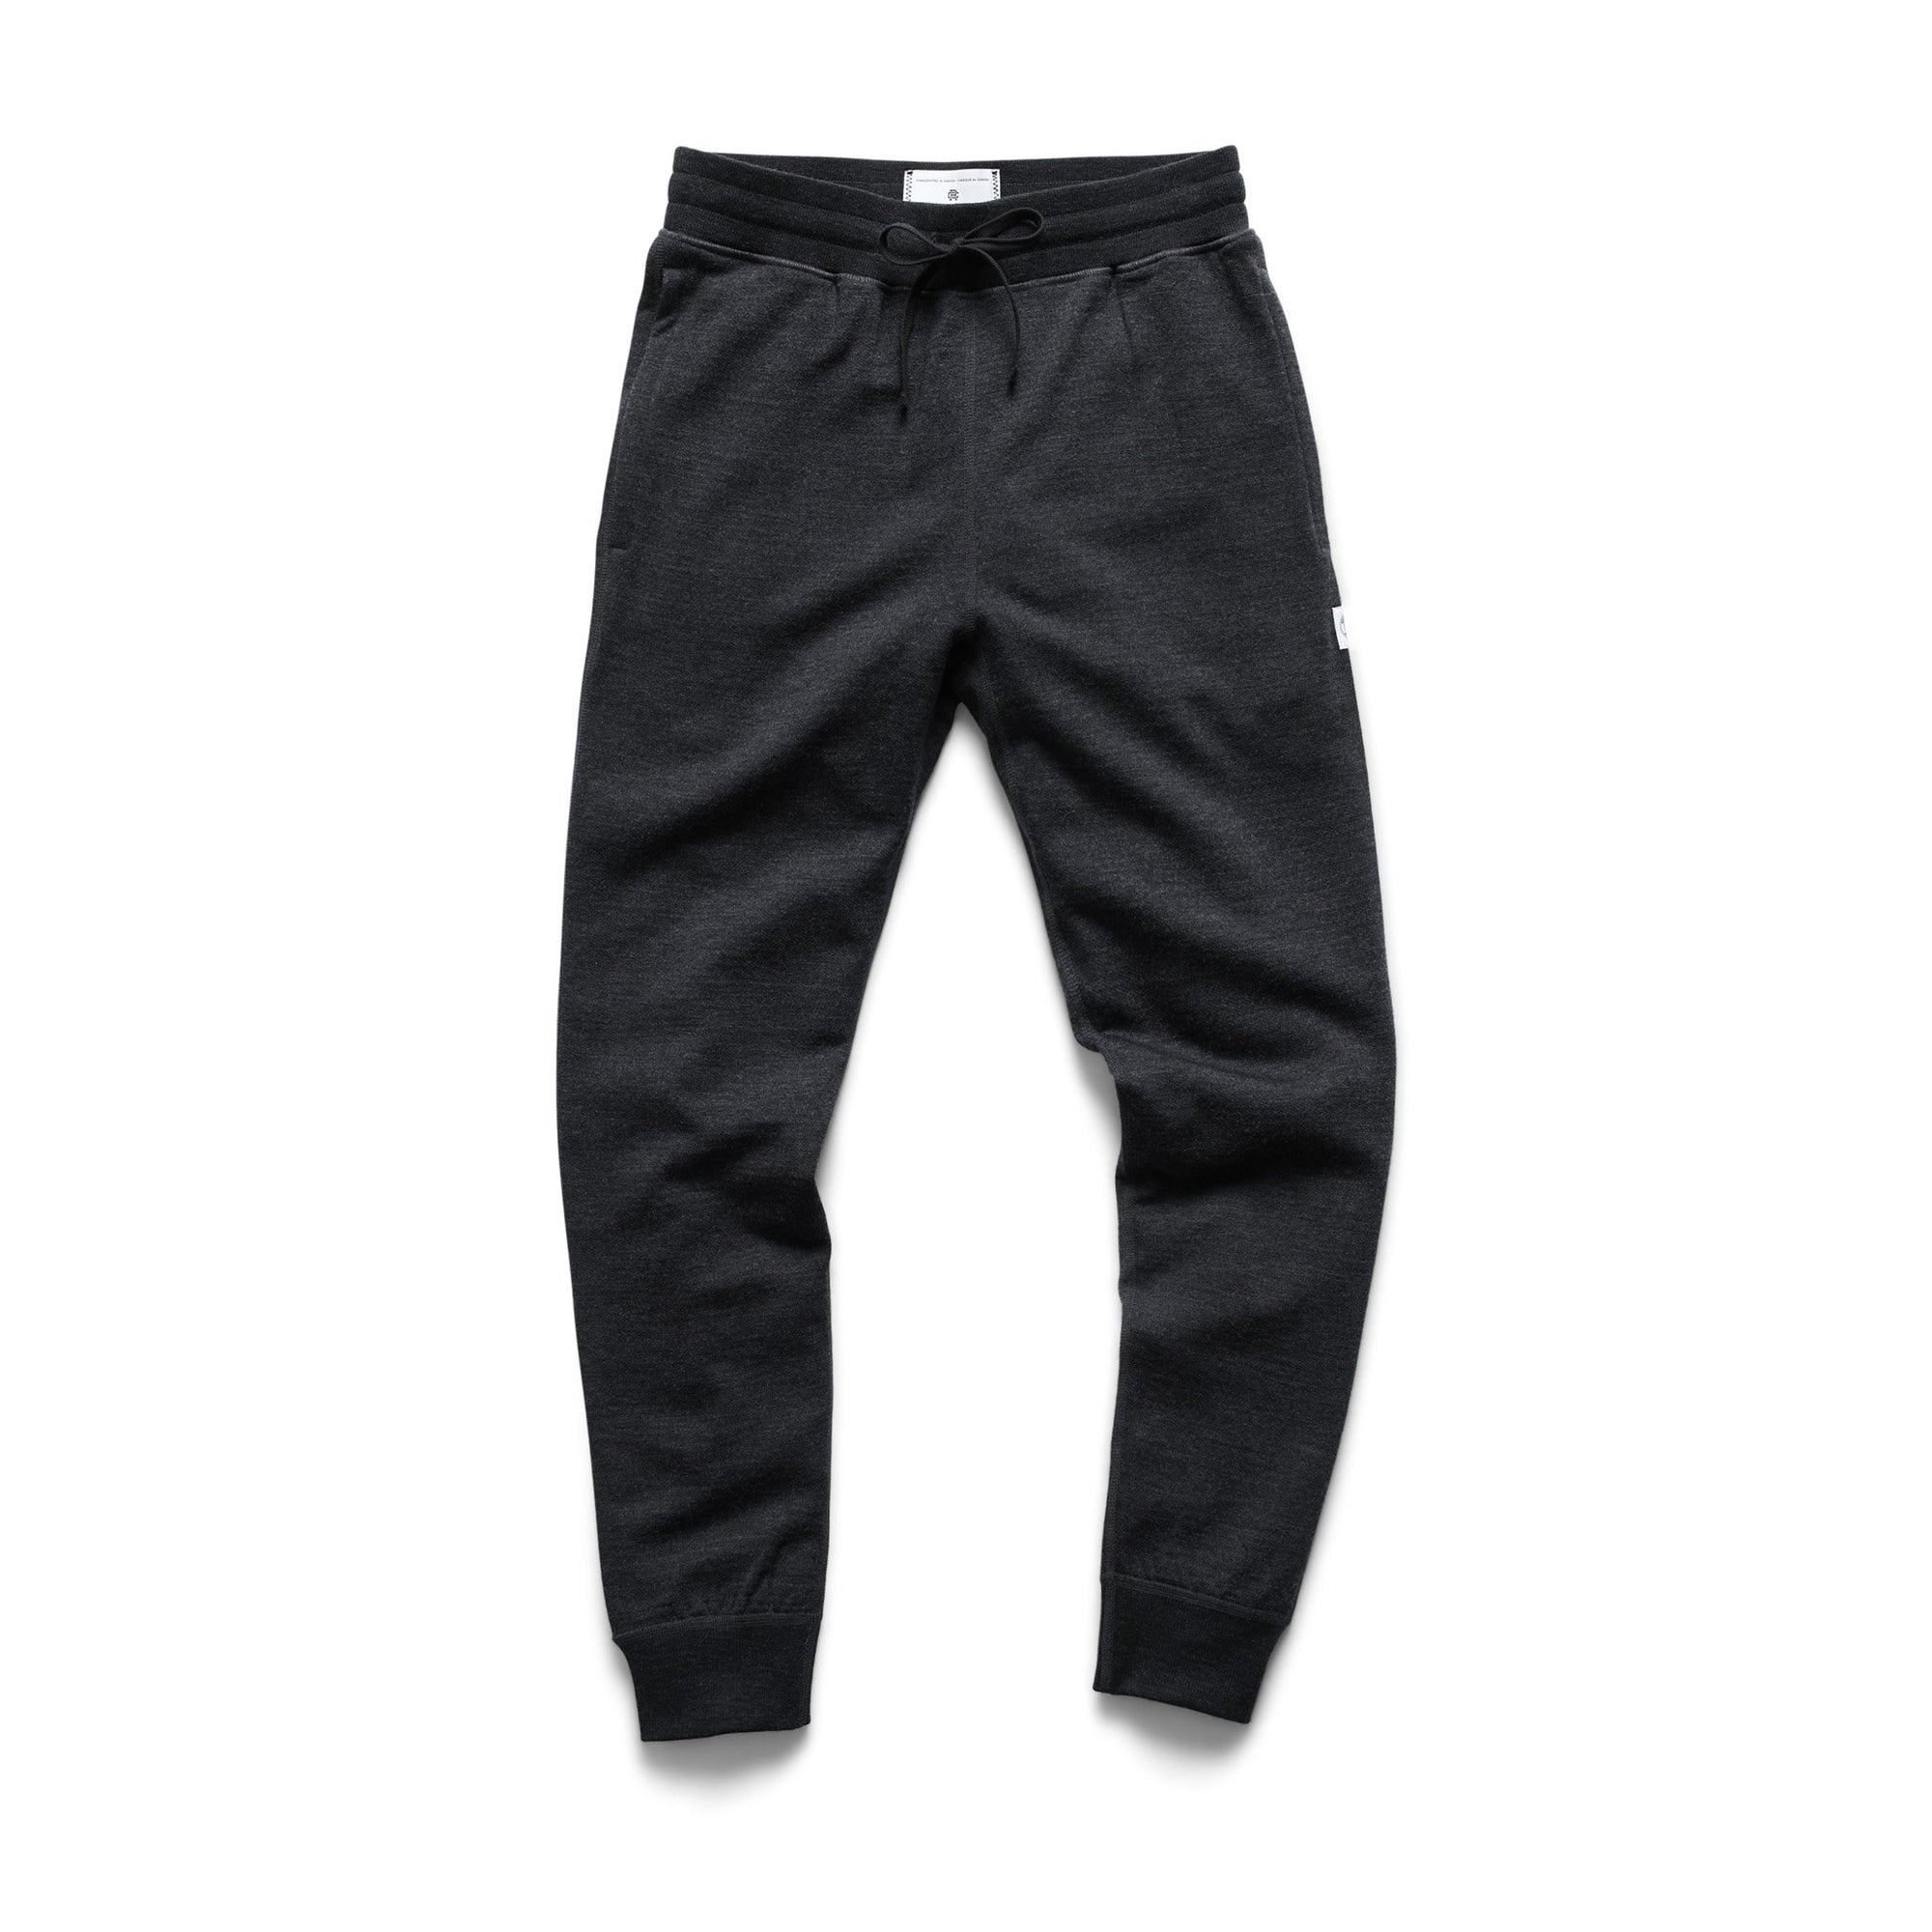 Reigning Champ Merino Terry Pant in Charcoal